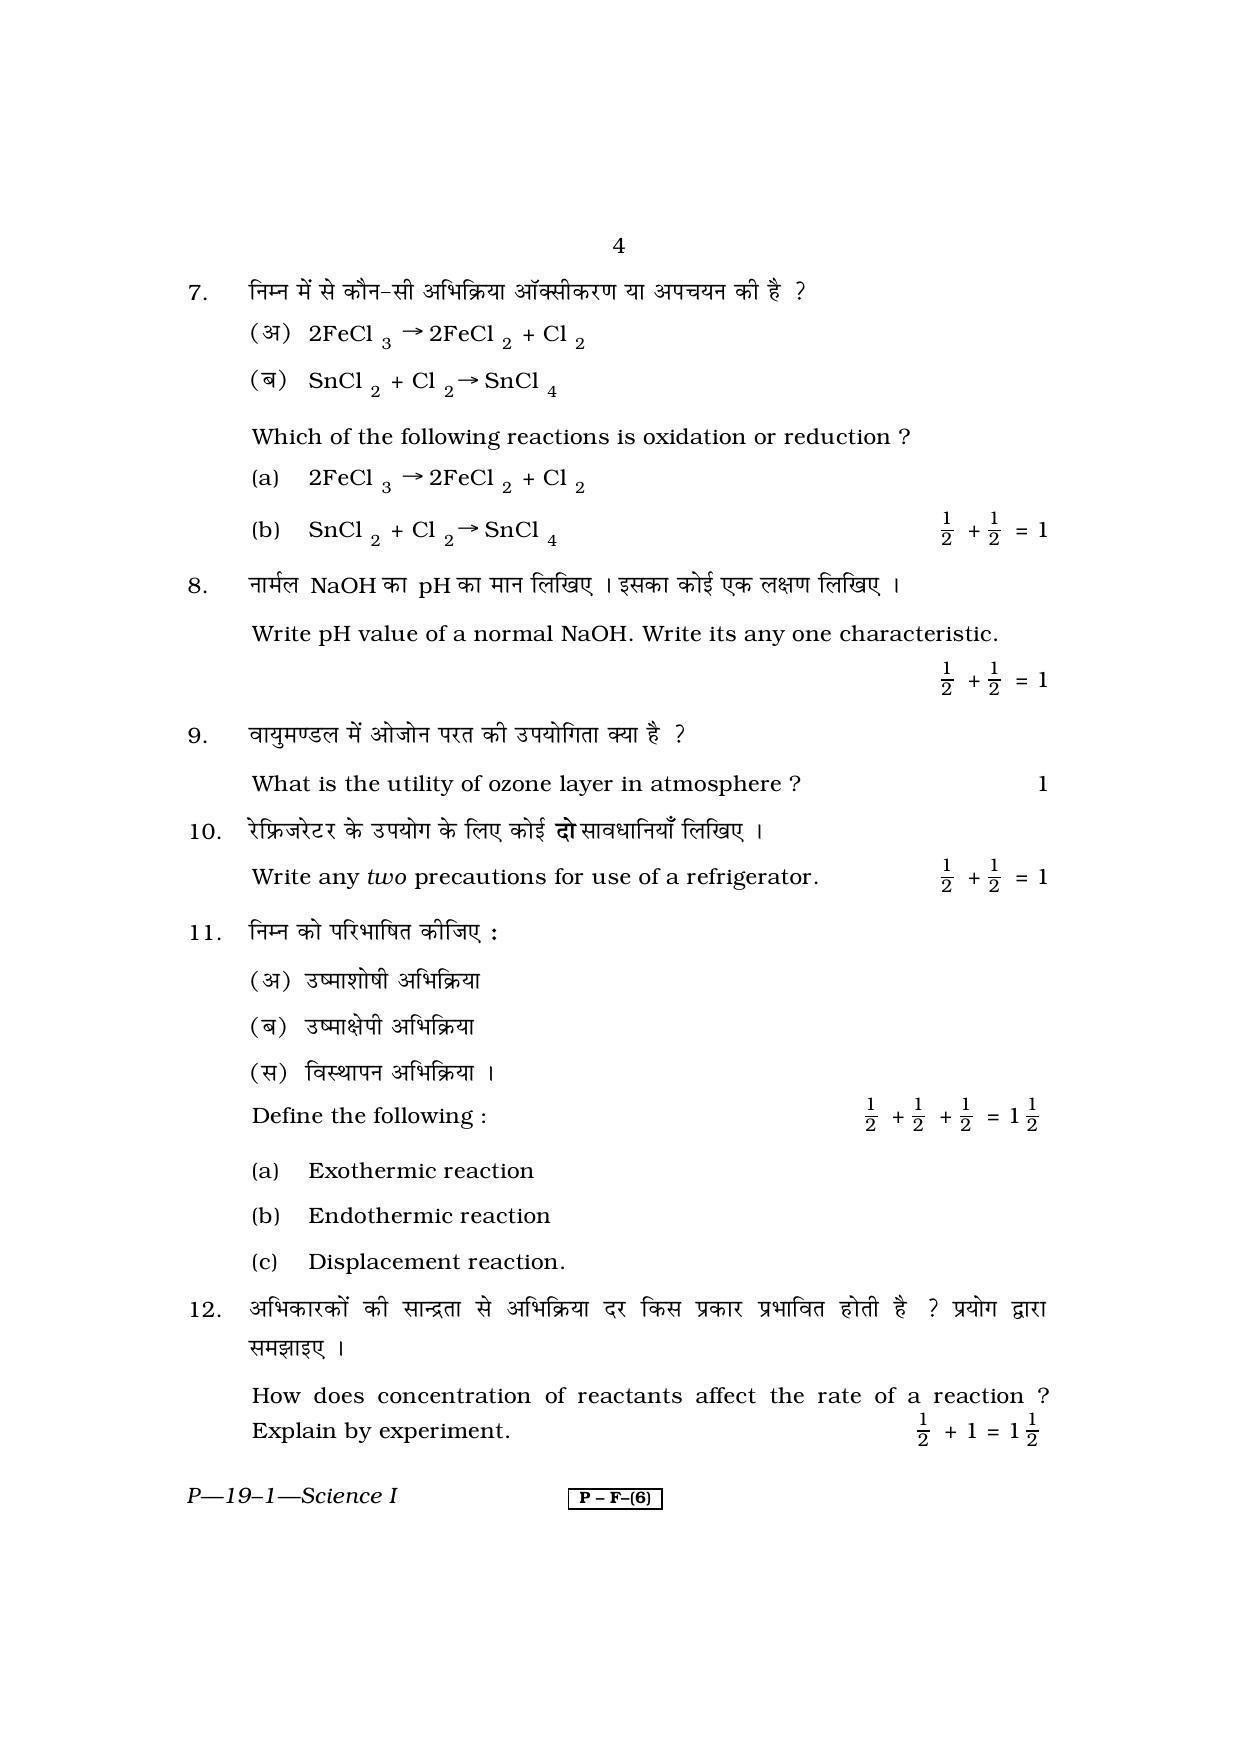 RBSE 2011 Science Praveshika Question Paper - Page 4